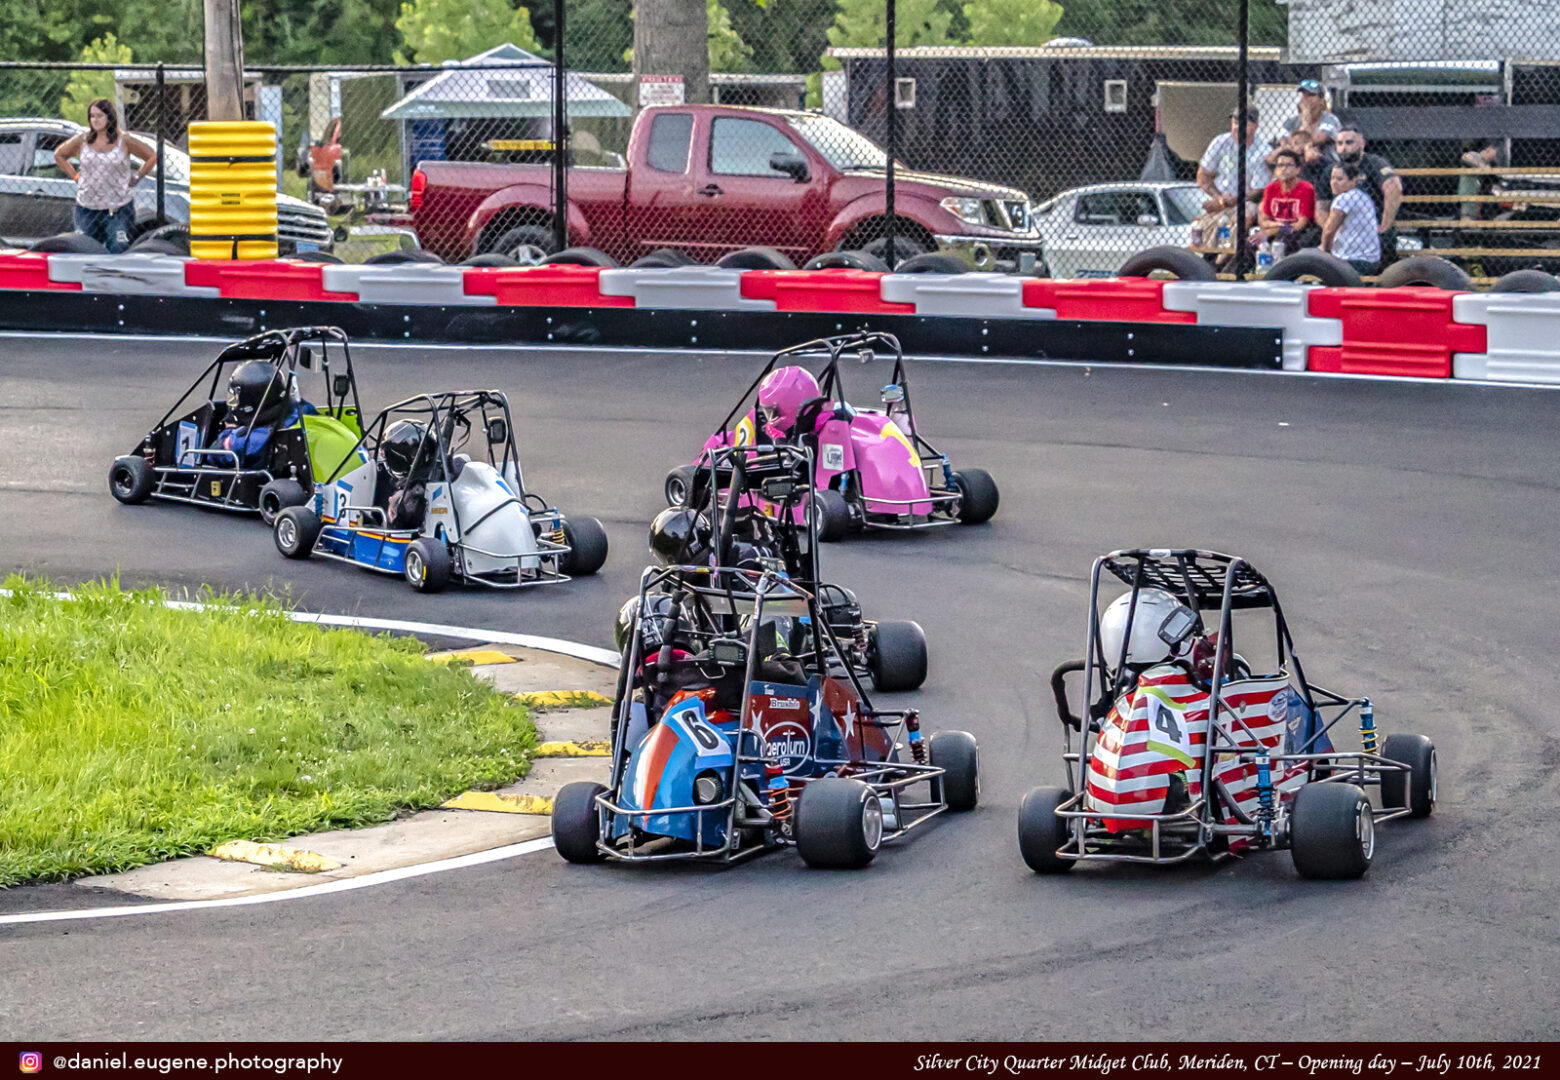 Children Turning on a Kart in a Racing Track